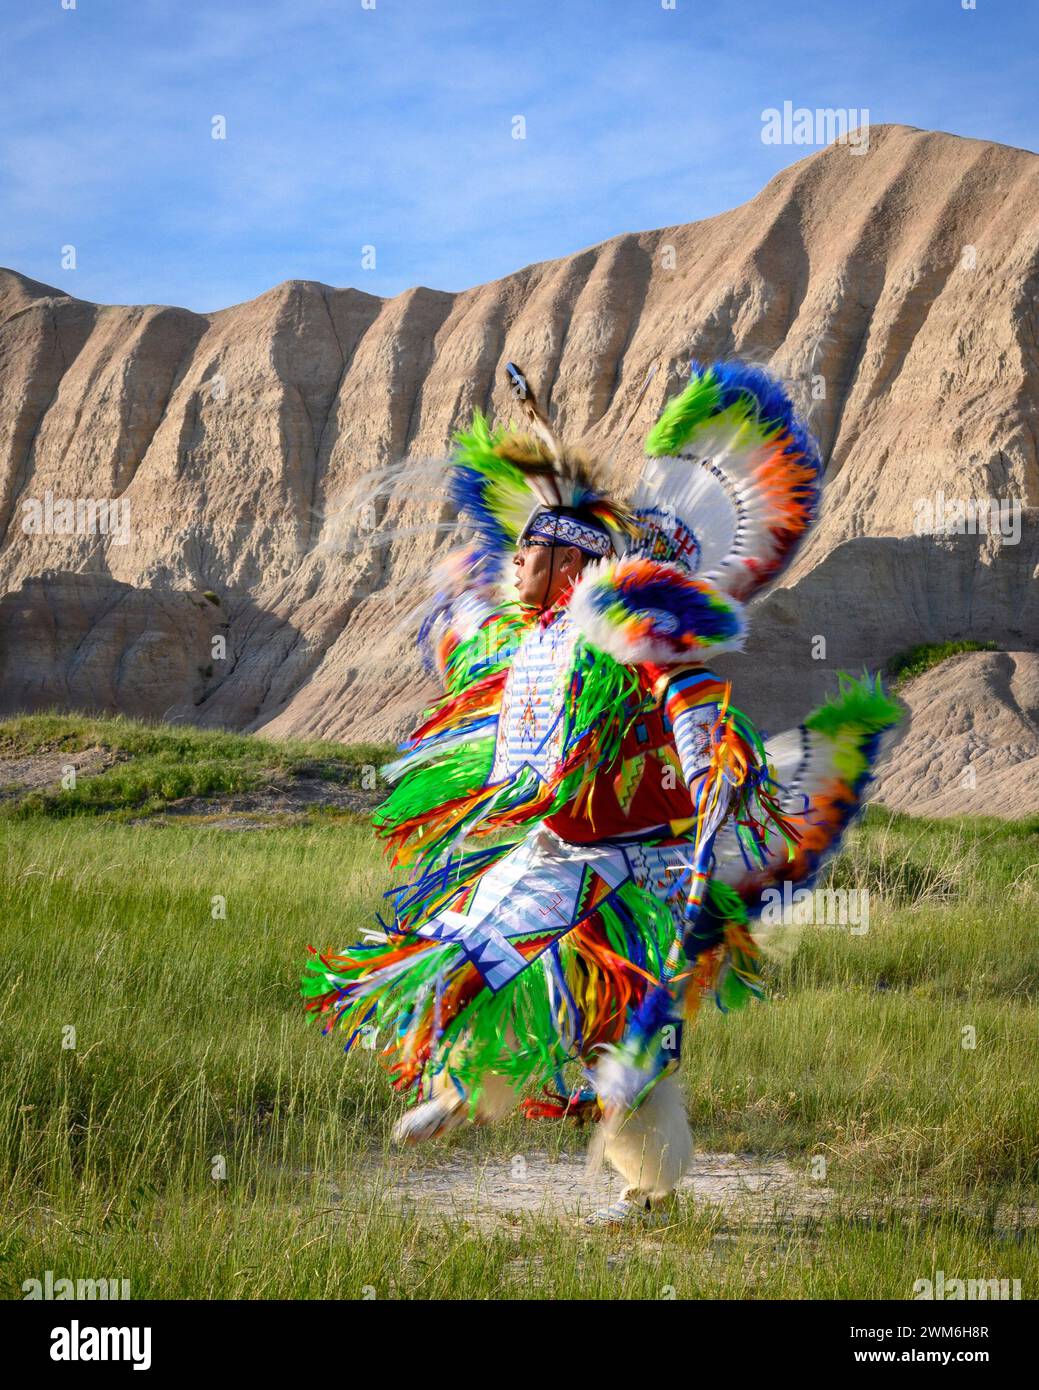 Geremiah Holy Bull performing a Fancy Dance in Badlands National Park, South Dakota. Stock Photo